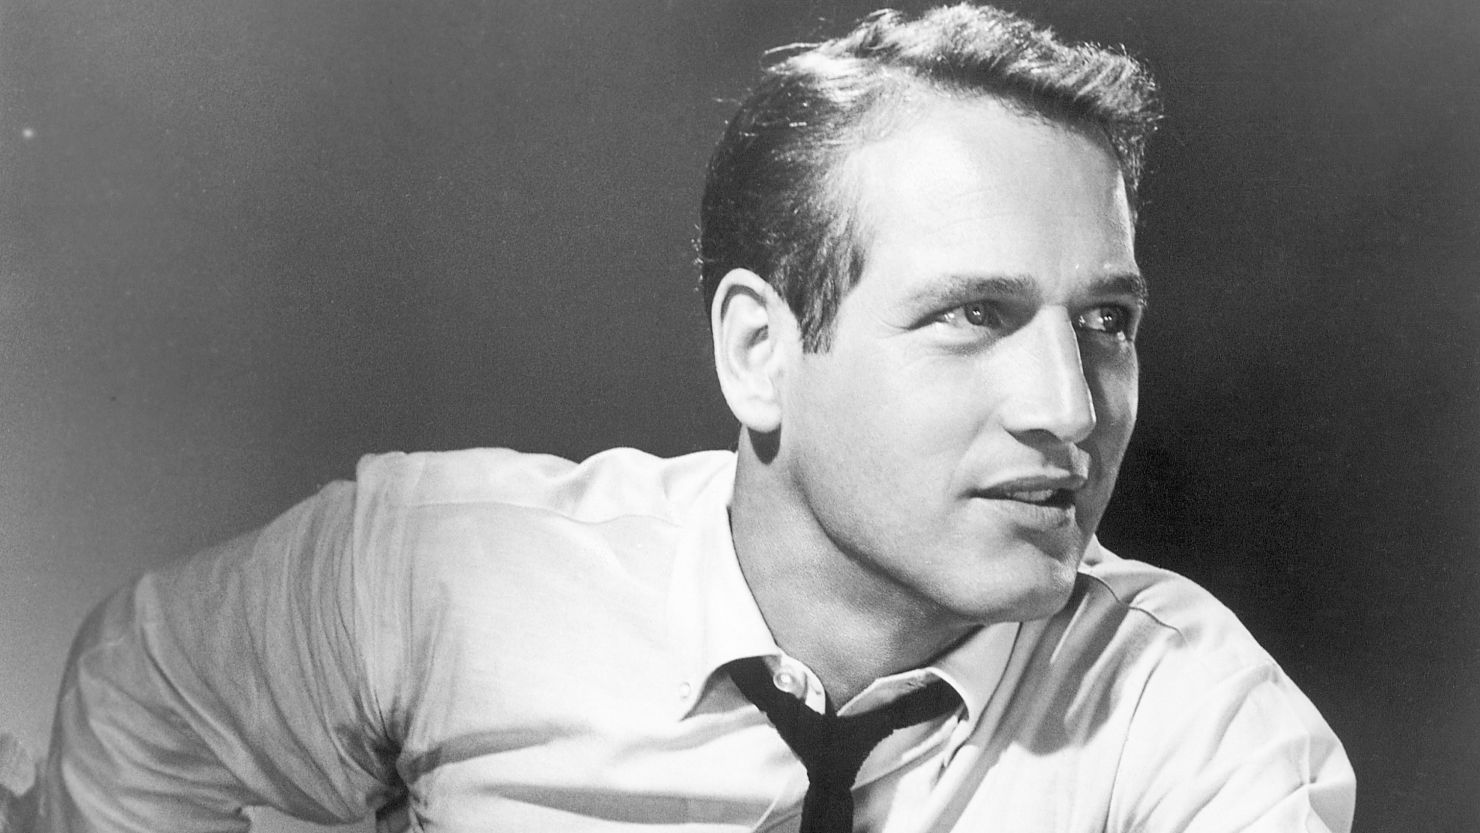 Paul Newman, photographed in 1962, was one of the biggest stars of the 1960s and 1970s.